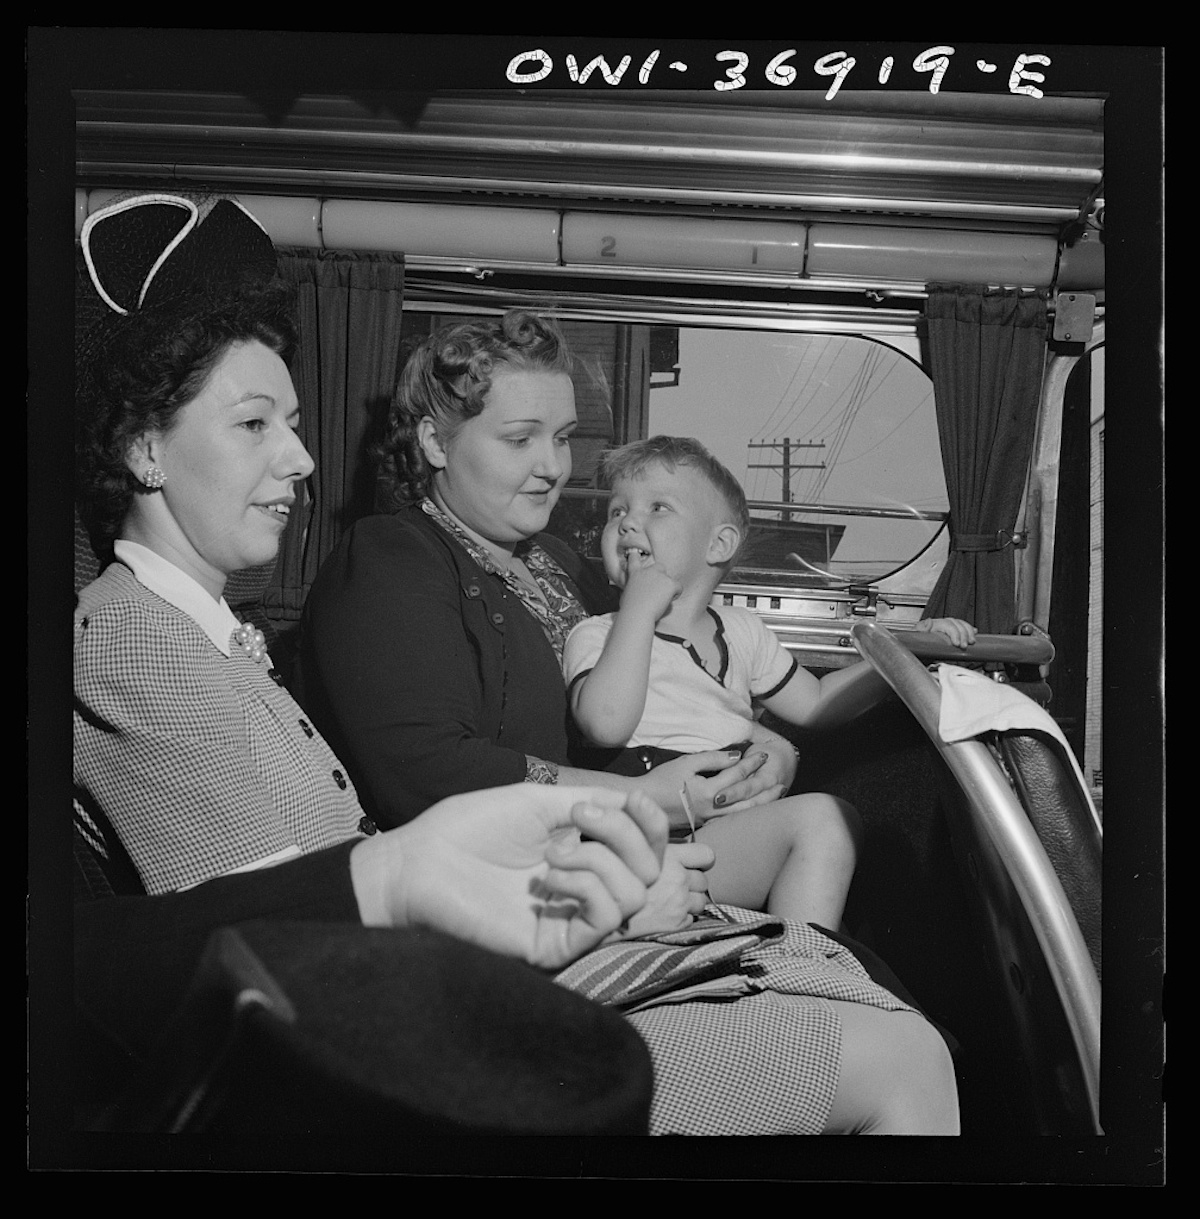 Passengers on a Greyhound bus going from Washington, D.C. to Pittsburgh, Pennsylvania